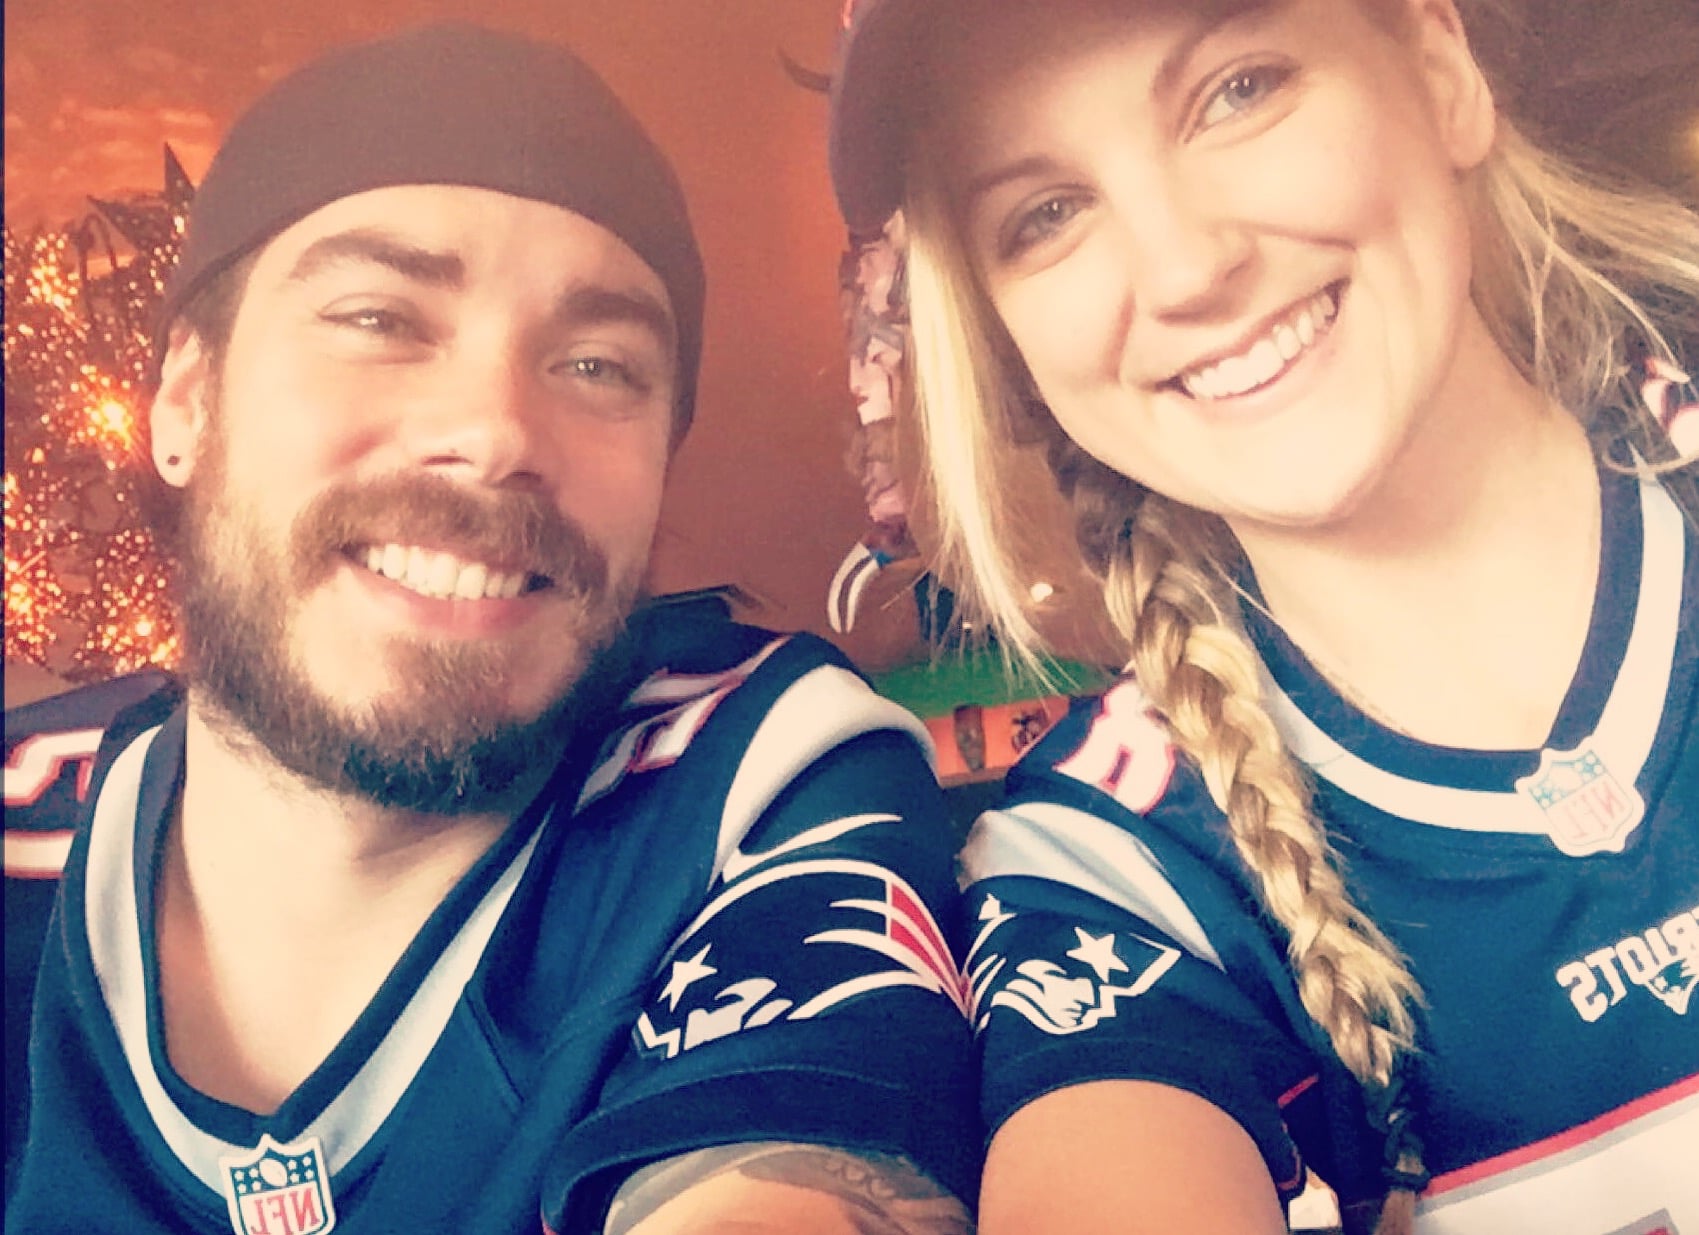 bride and groom to be smiling and wearing football jersey.